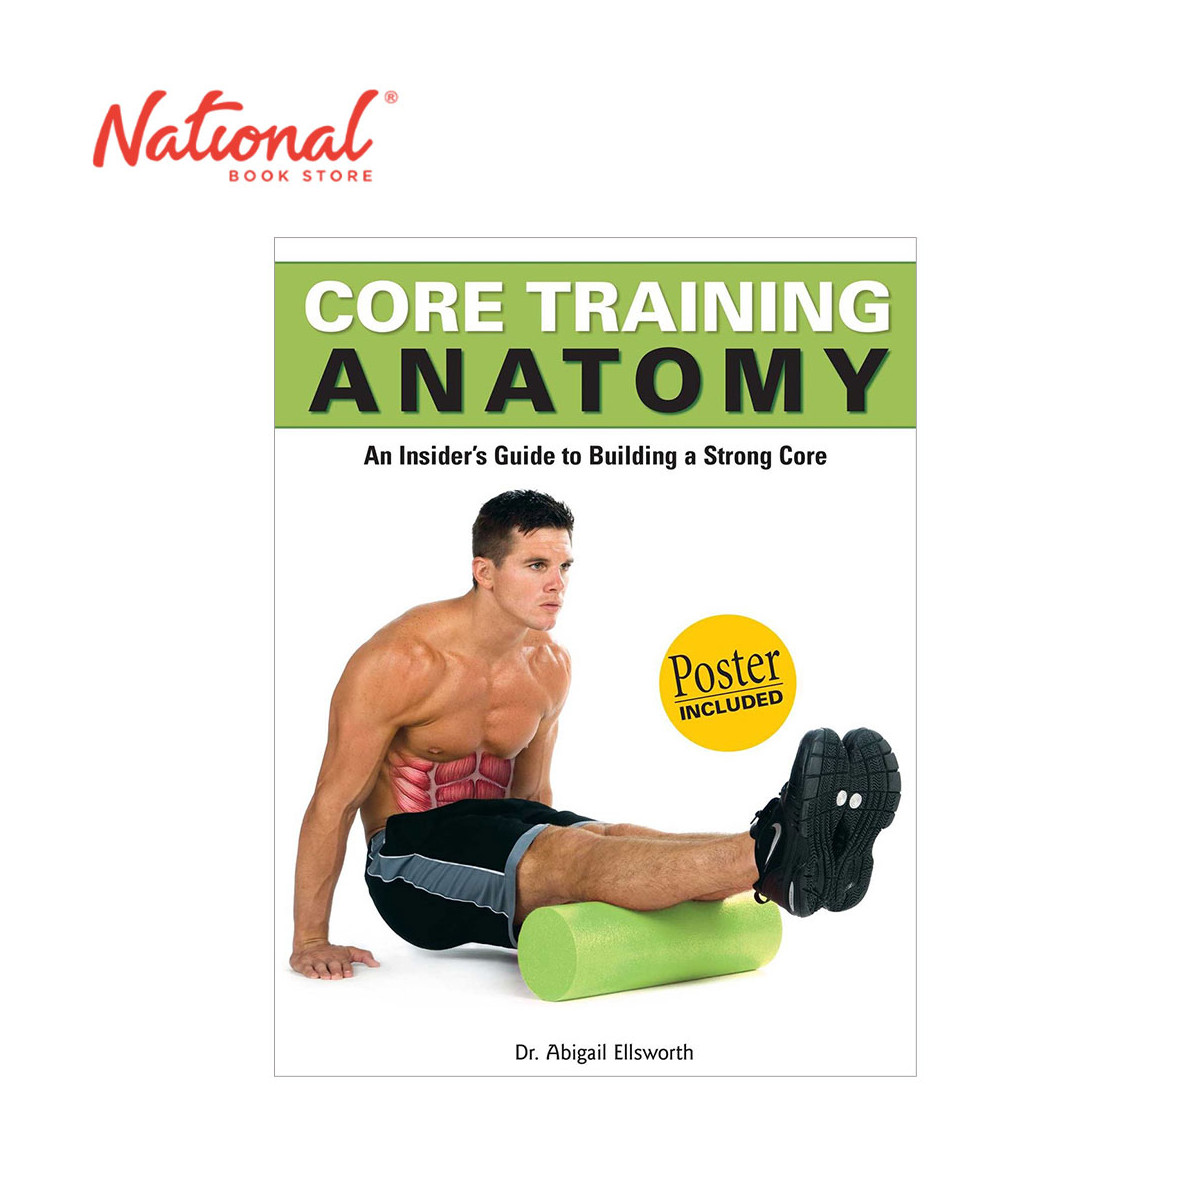 Core Training Anatomy by Abigail Ellsworth - Trade Paperback - Health & Fitness - Sports & Exercise